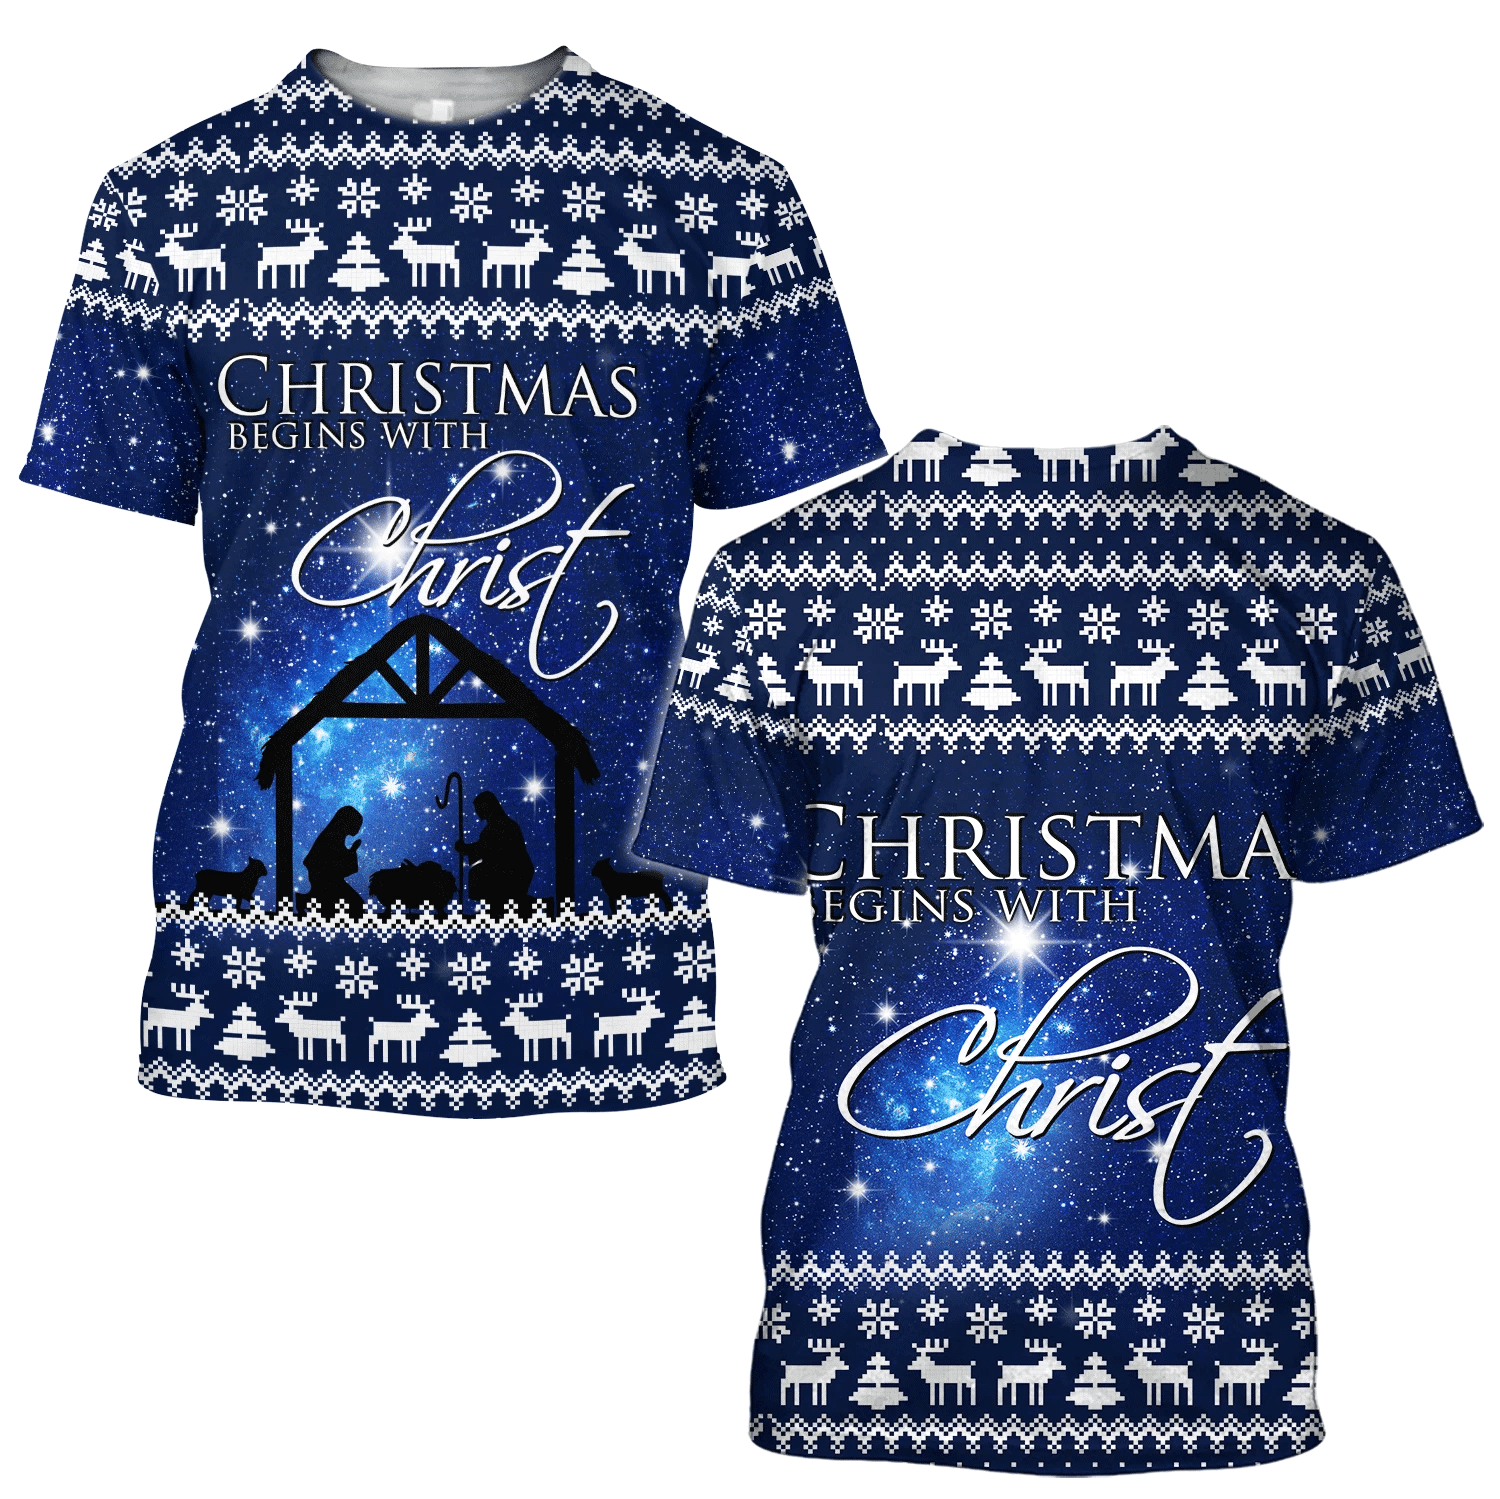 Christmas Begin With Christ All Over Print 3D Shirt Style: 3D T-Shirt, Color: Blue